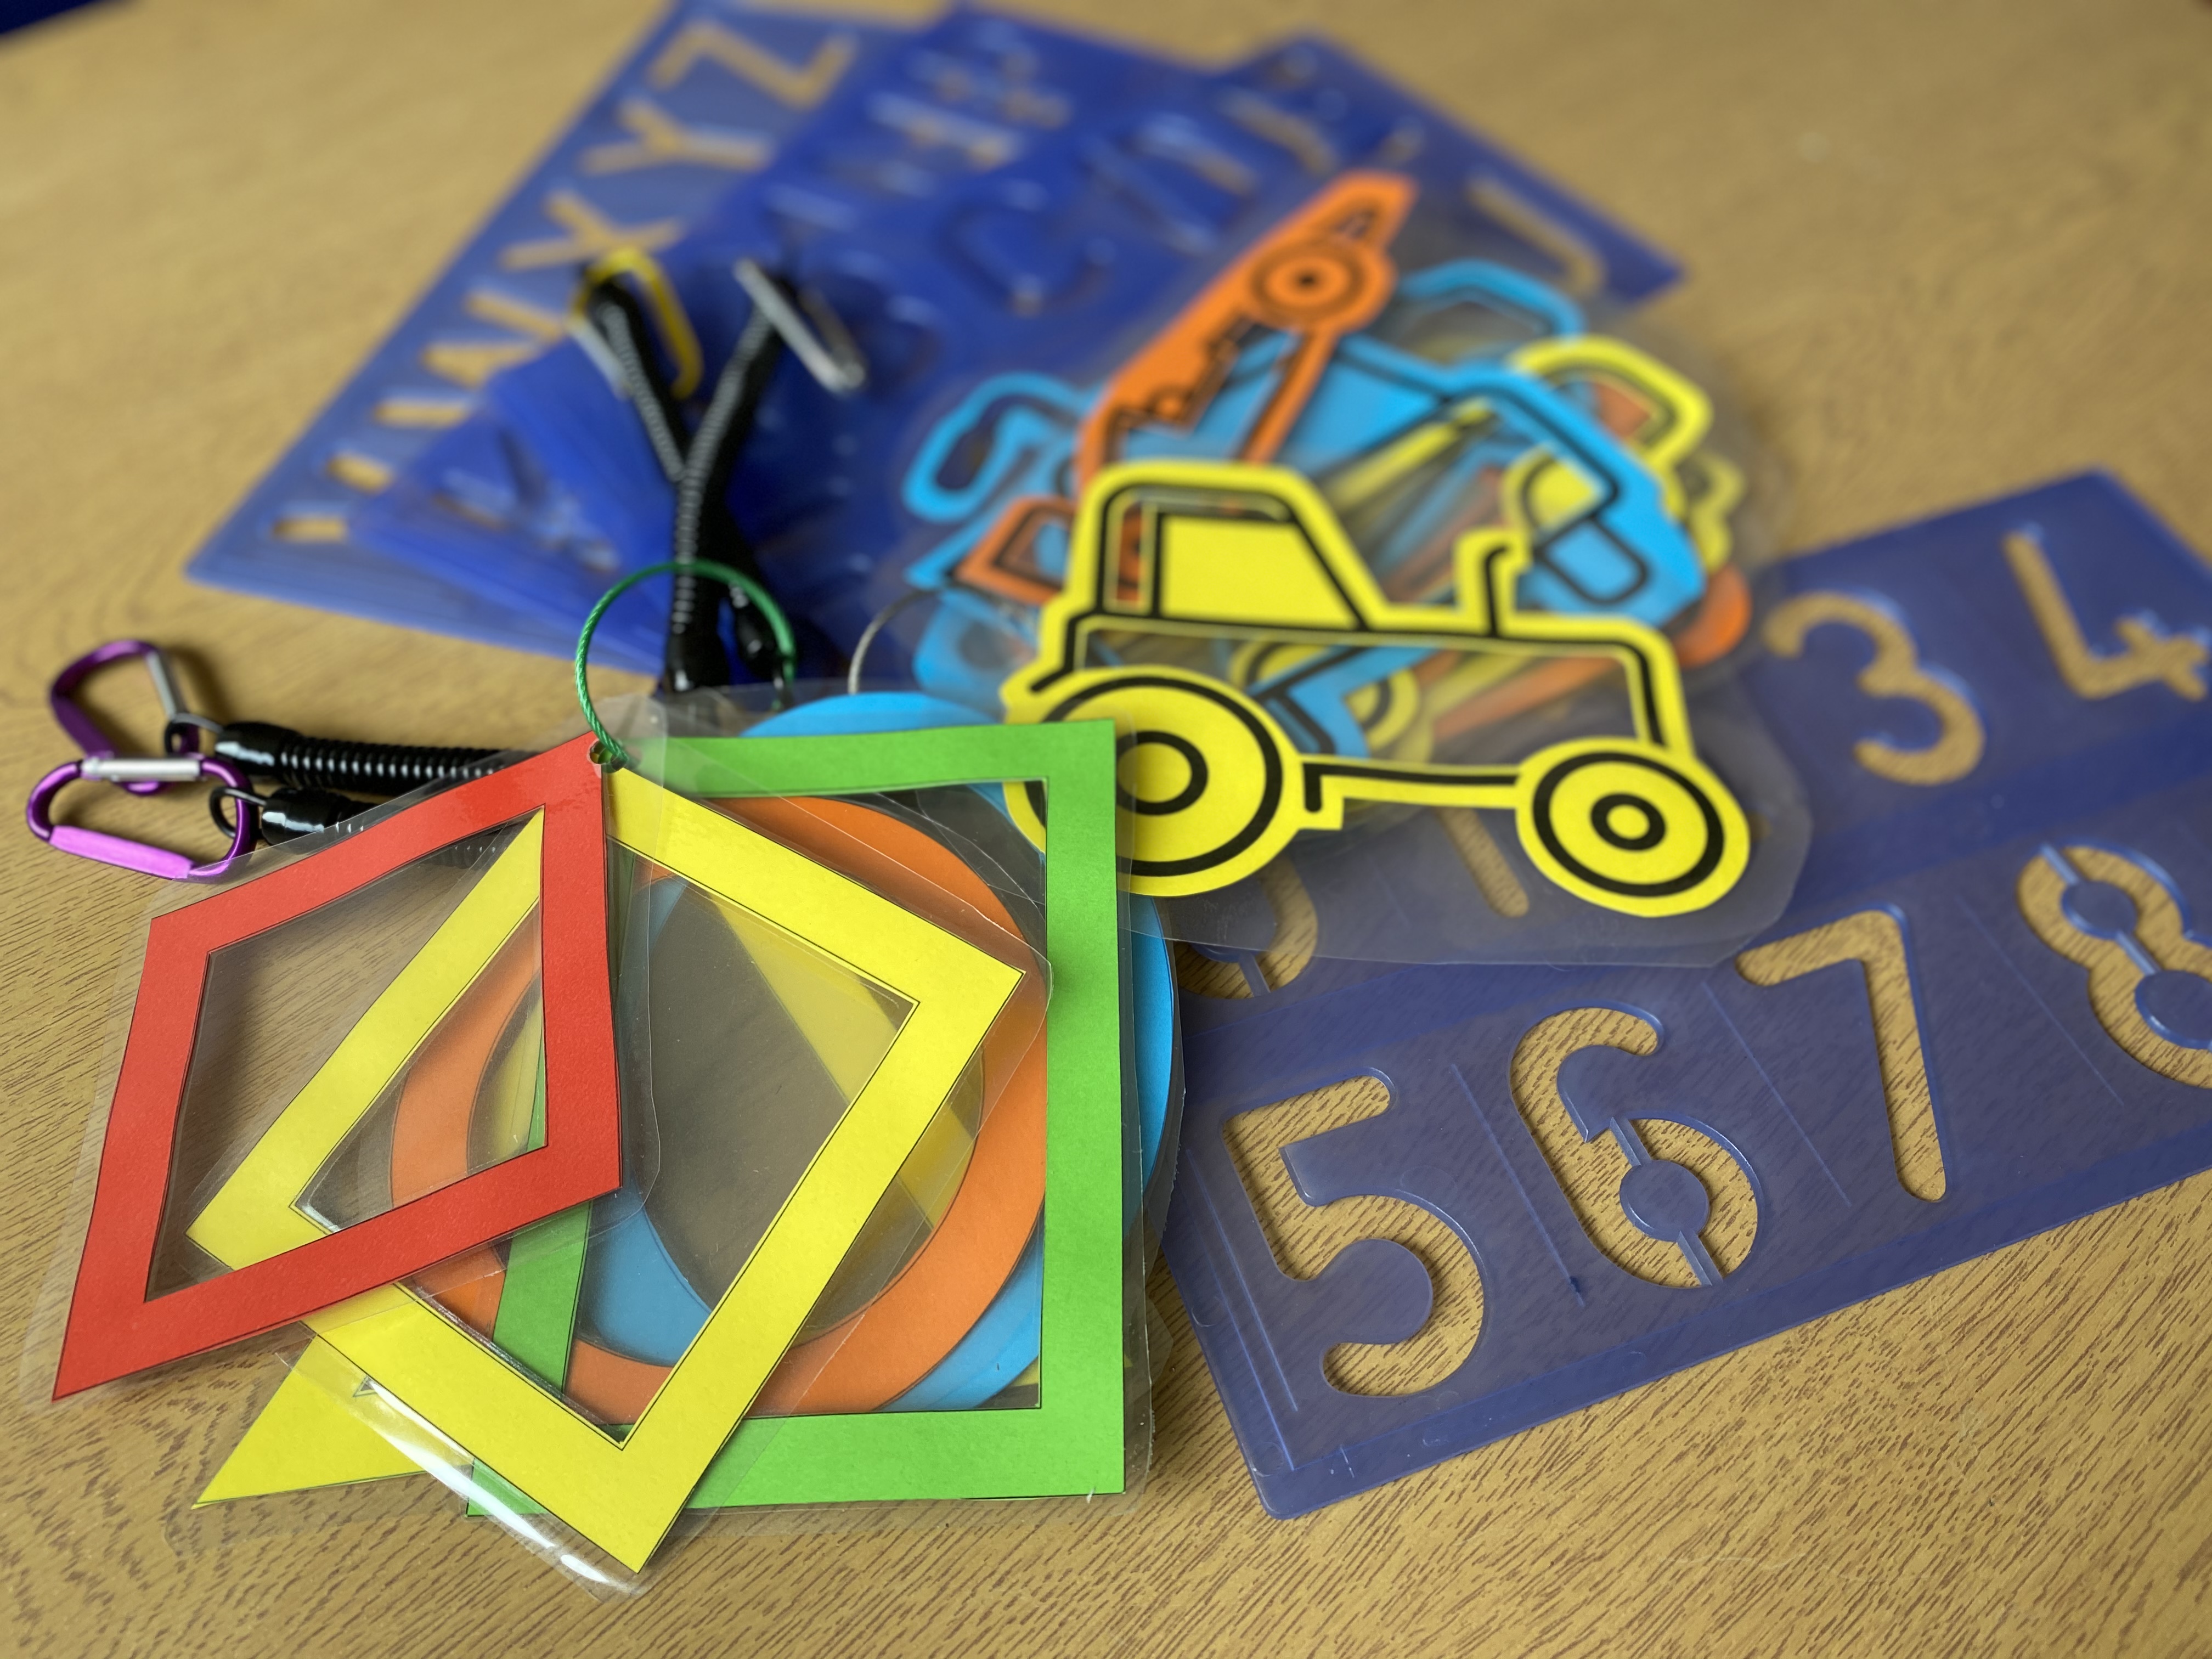 A selection of play items including number and alphabet stencils and cut-out, laminated tractors and squares